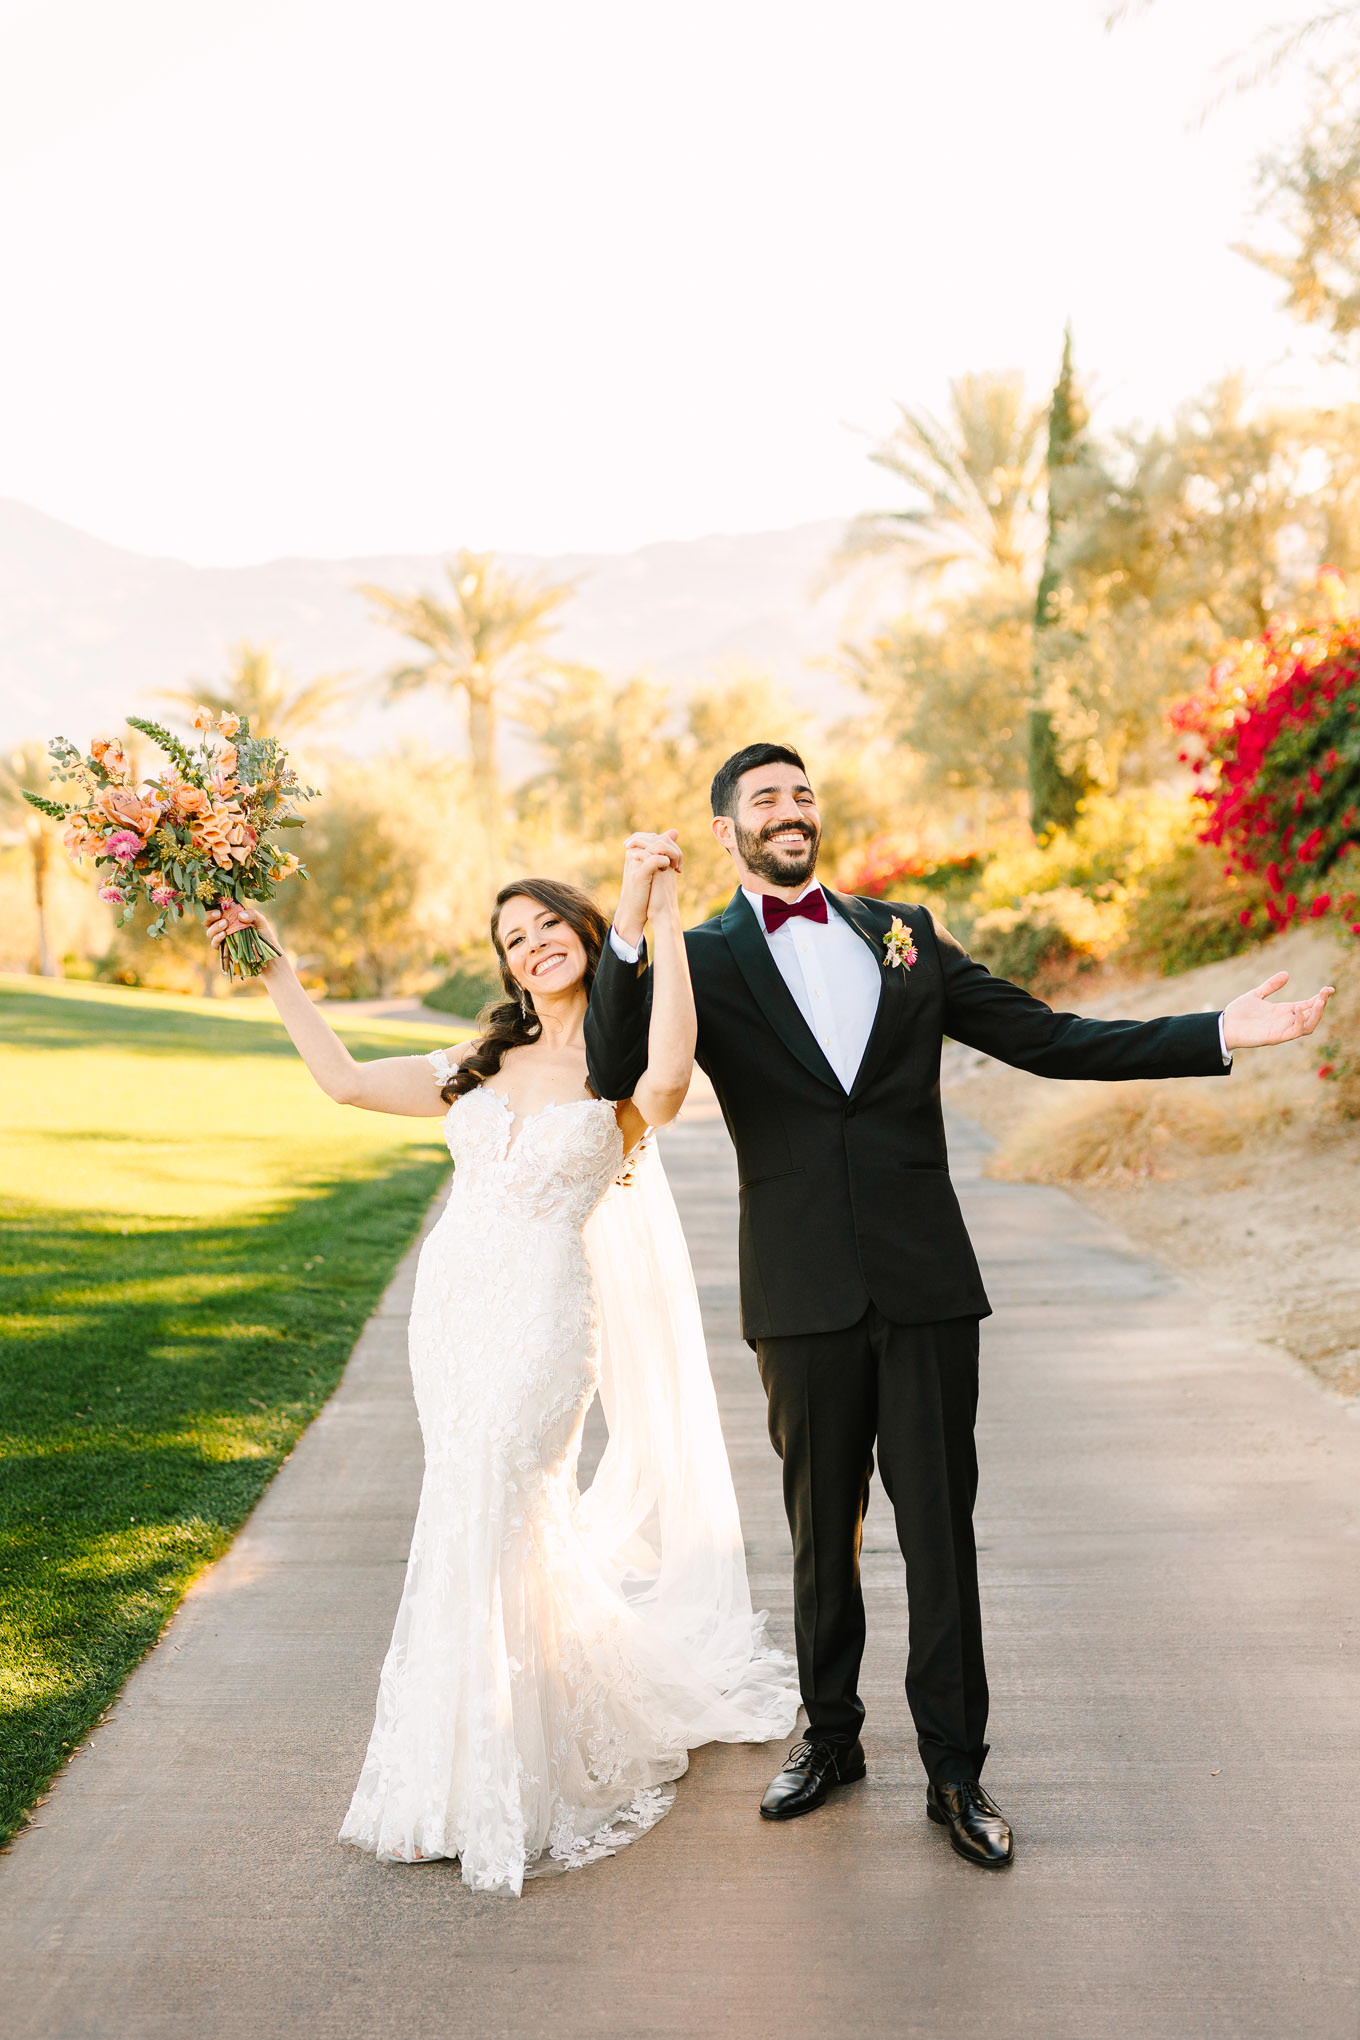 La Quinta Country Club Wedding | Wedding and elopement photography roundup | Los Angeles and Palm Springs photographer | #losangeleswedding #palmspringswedding #elopementphotographer Source: Mary Costa Photography | Los Angeles